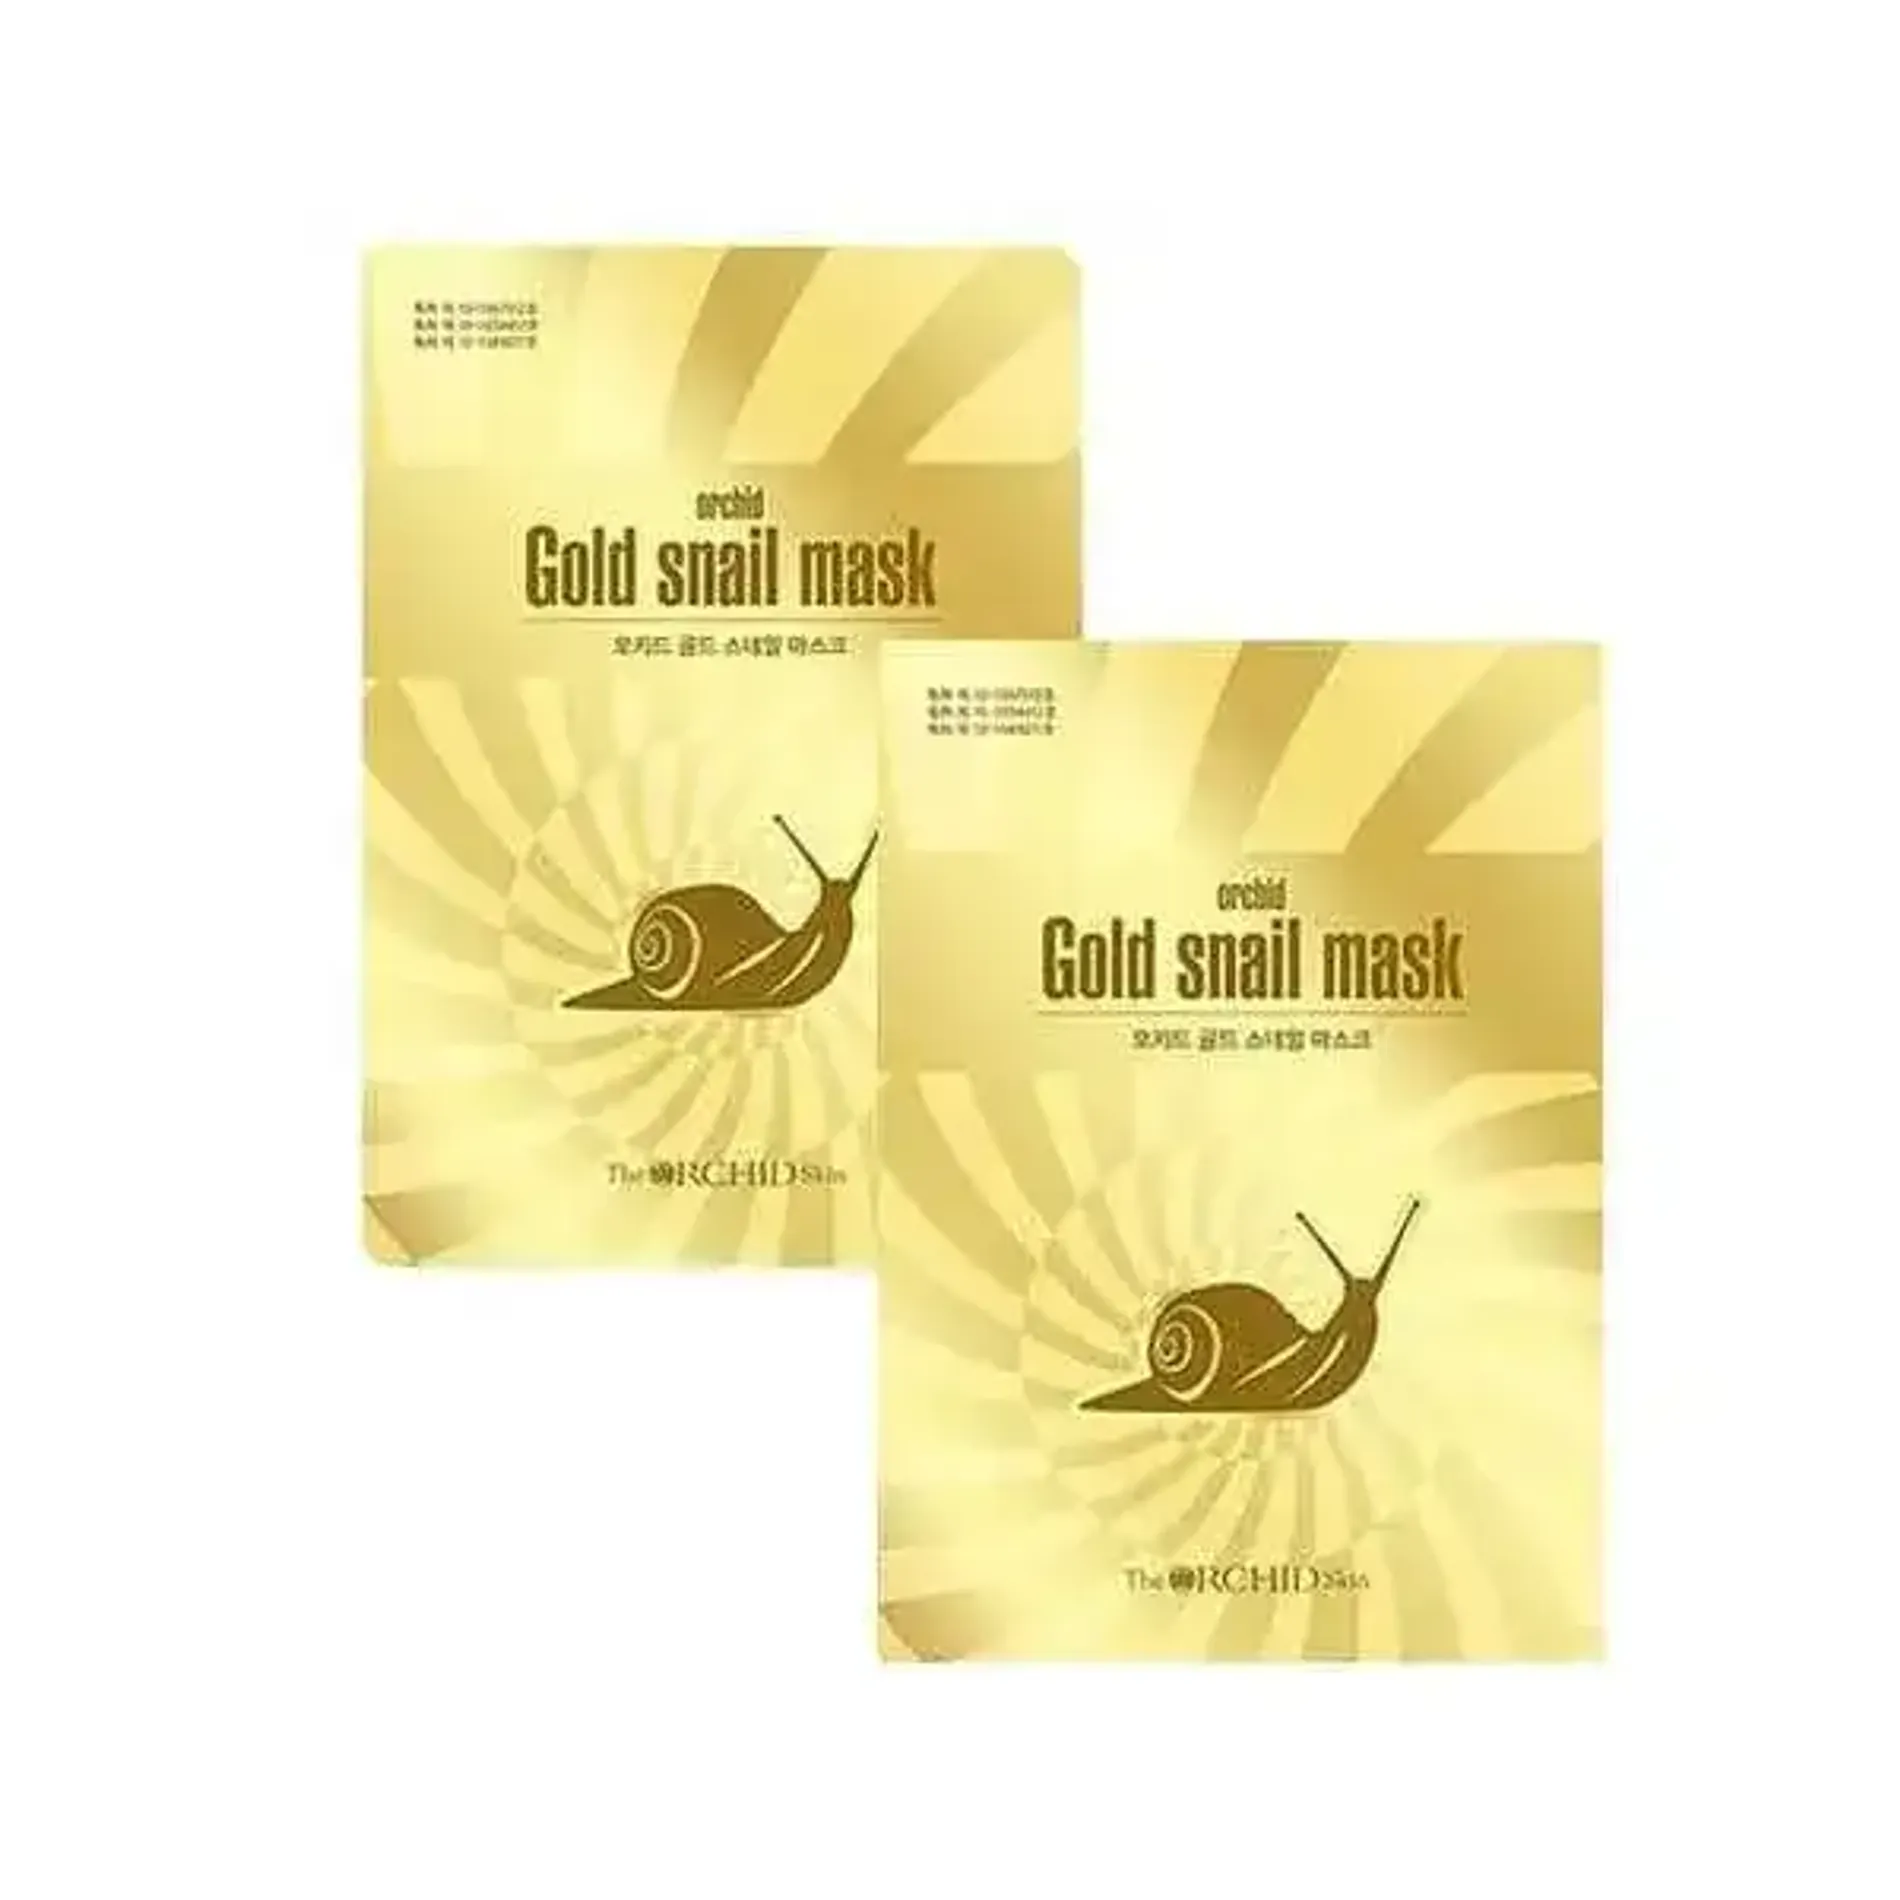 mat-na-giay-the-orchid-skin-gold-snail-mask-25ml-2